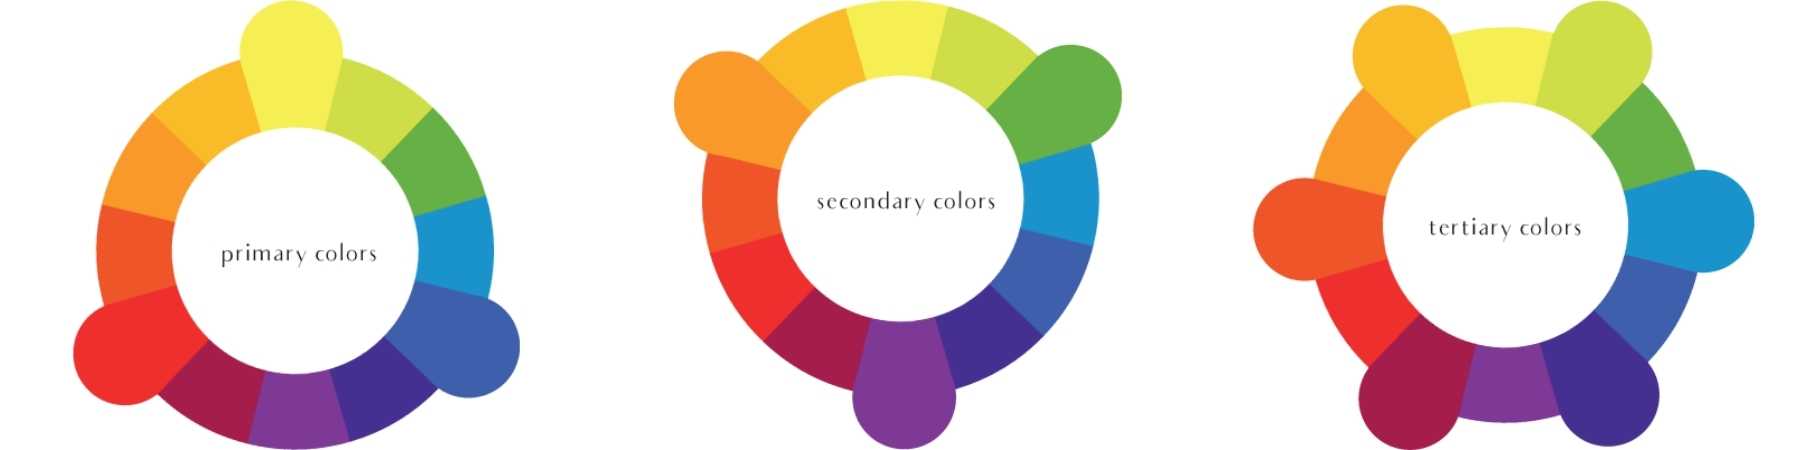 Primary, Secondary and Tertiary Color Wheels